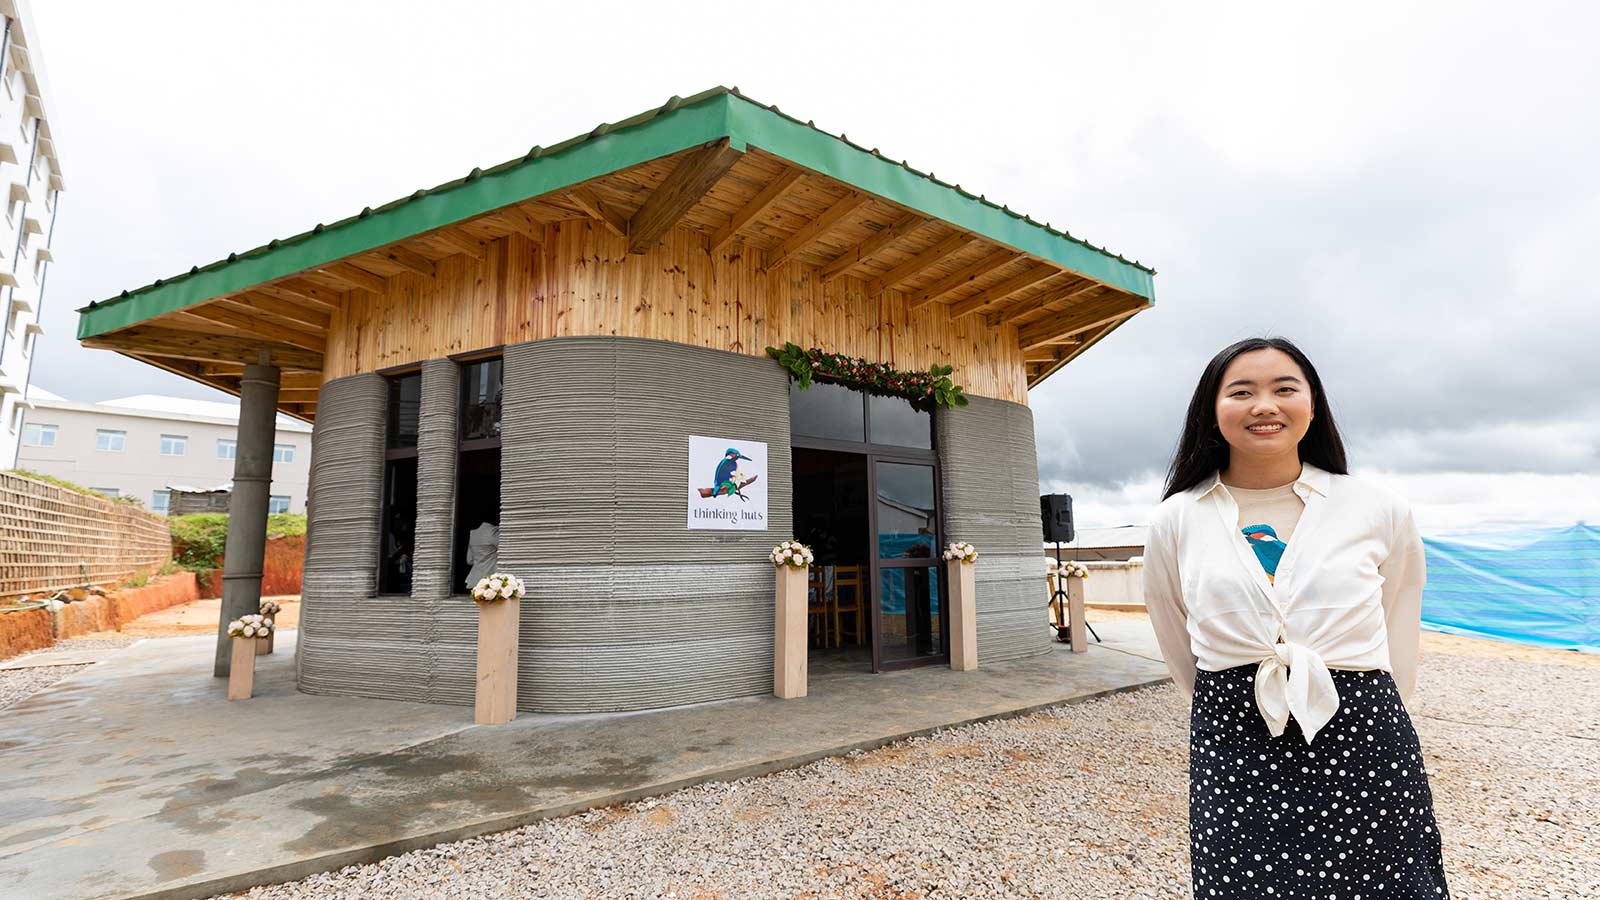 maggie grout thinking huts founder in front of first printed school